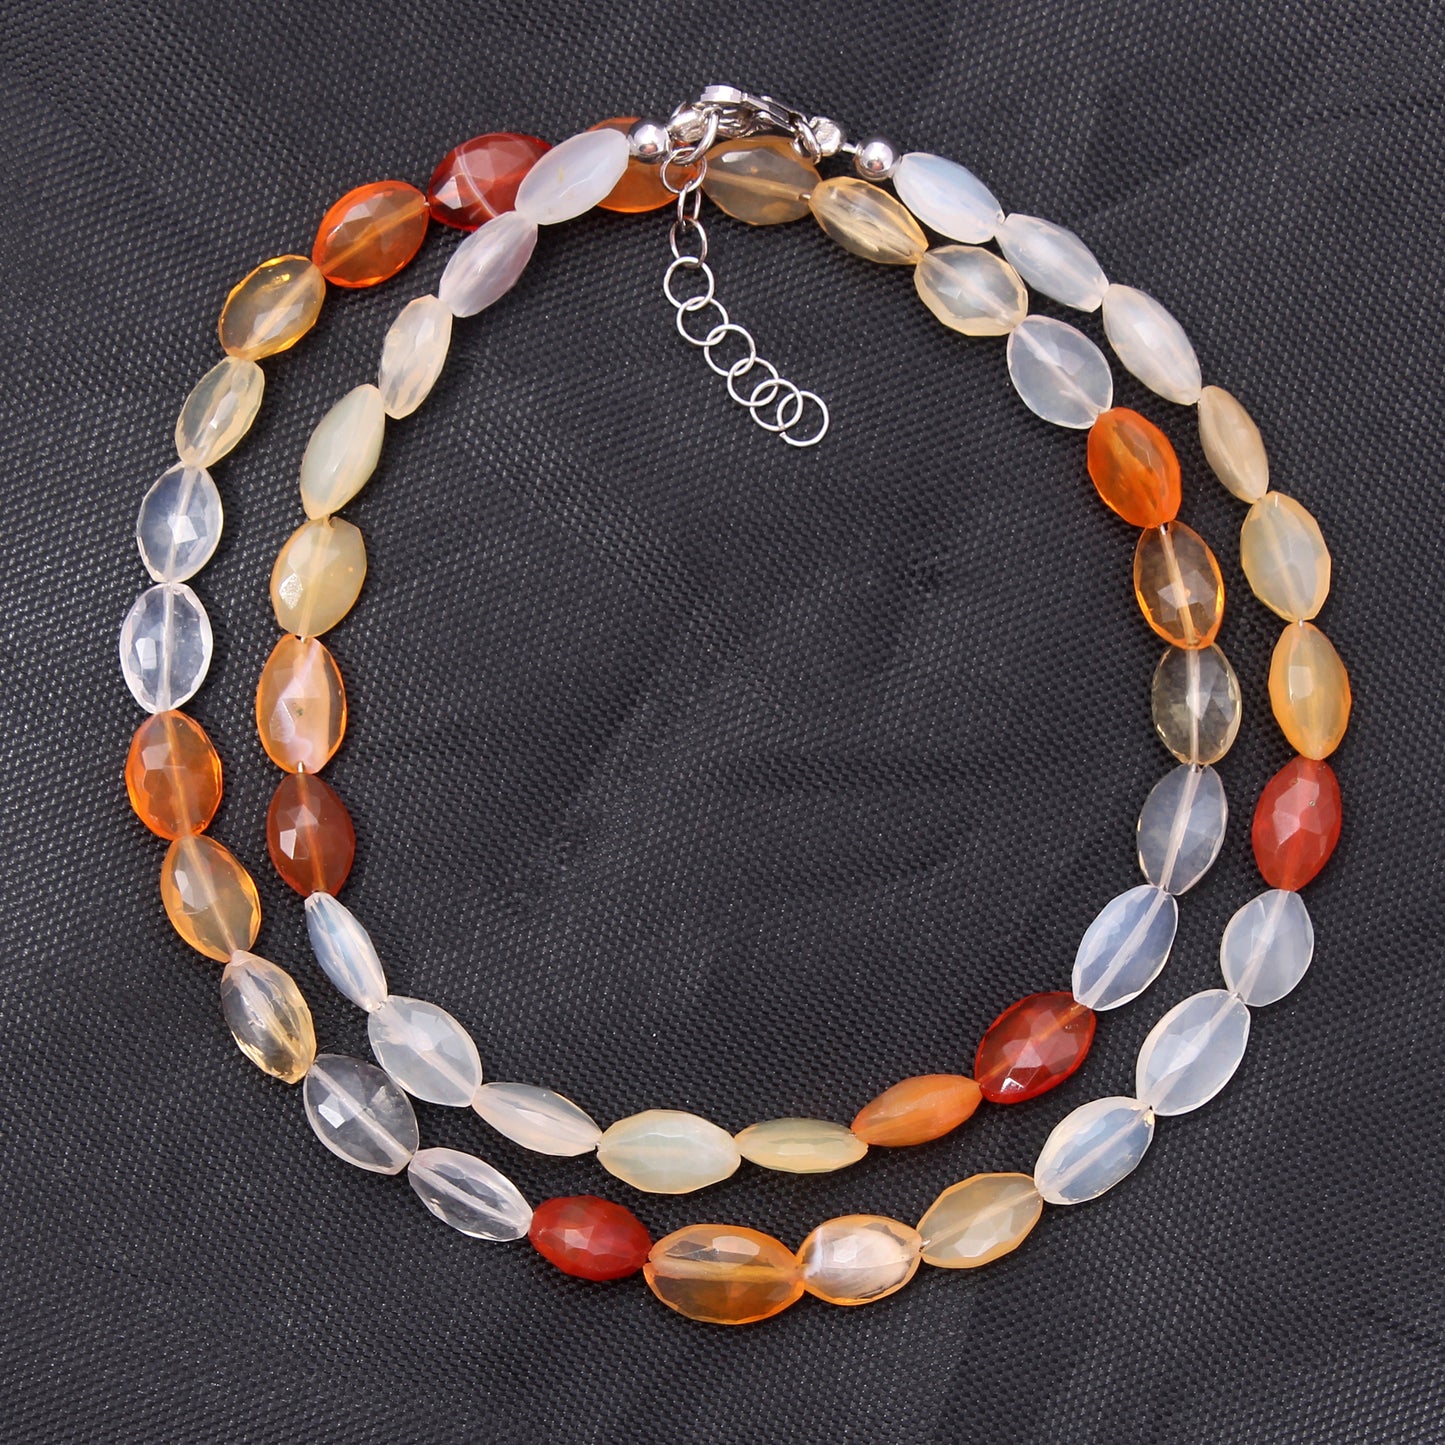 Mexican Fire Opal Faceted Gemstone Necklace, Oval Beaded Necklace